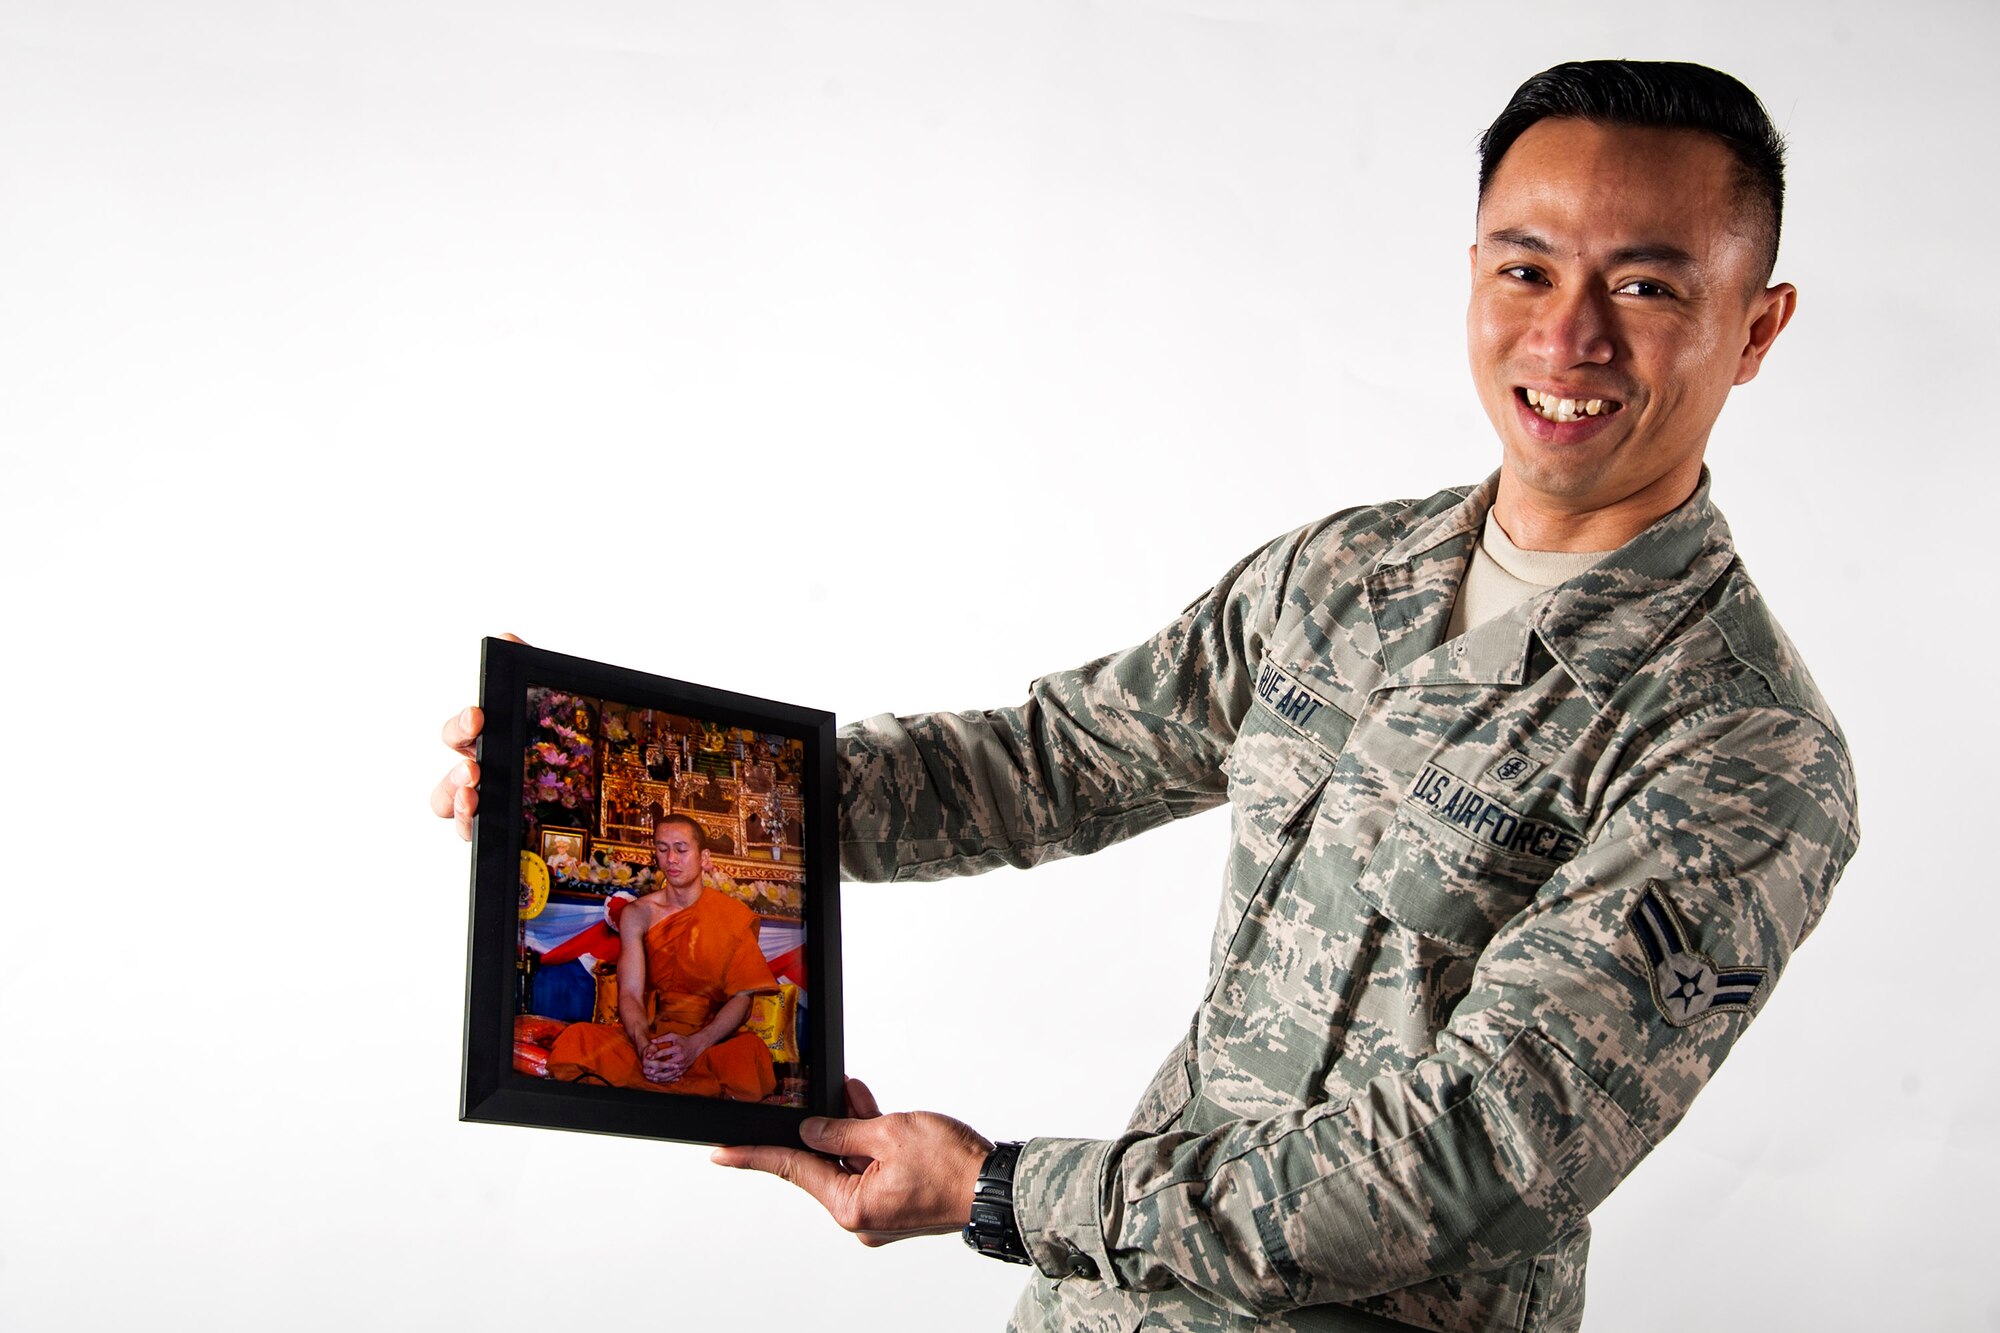 Airman 1st Class Kornkawee Rue Art, 23d Medical Support Squadron pharmacy technician, poses for a photo, March 21, 2018, at Moody Air Force Base, Ga. After spending 18 years as a monk, Rue Art traded his robes for a uniform, in his continual pursuit of a life bigger than himself; one of meaning and purpose. (U.S. Air Force photo by Airman 1st Class Erick Requadt)